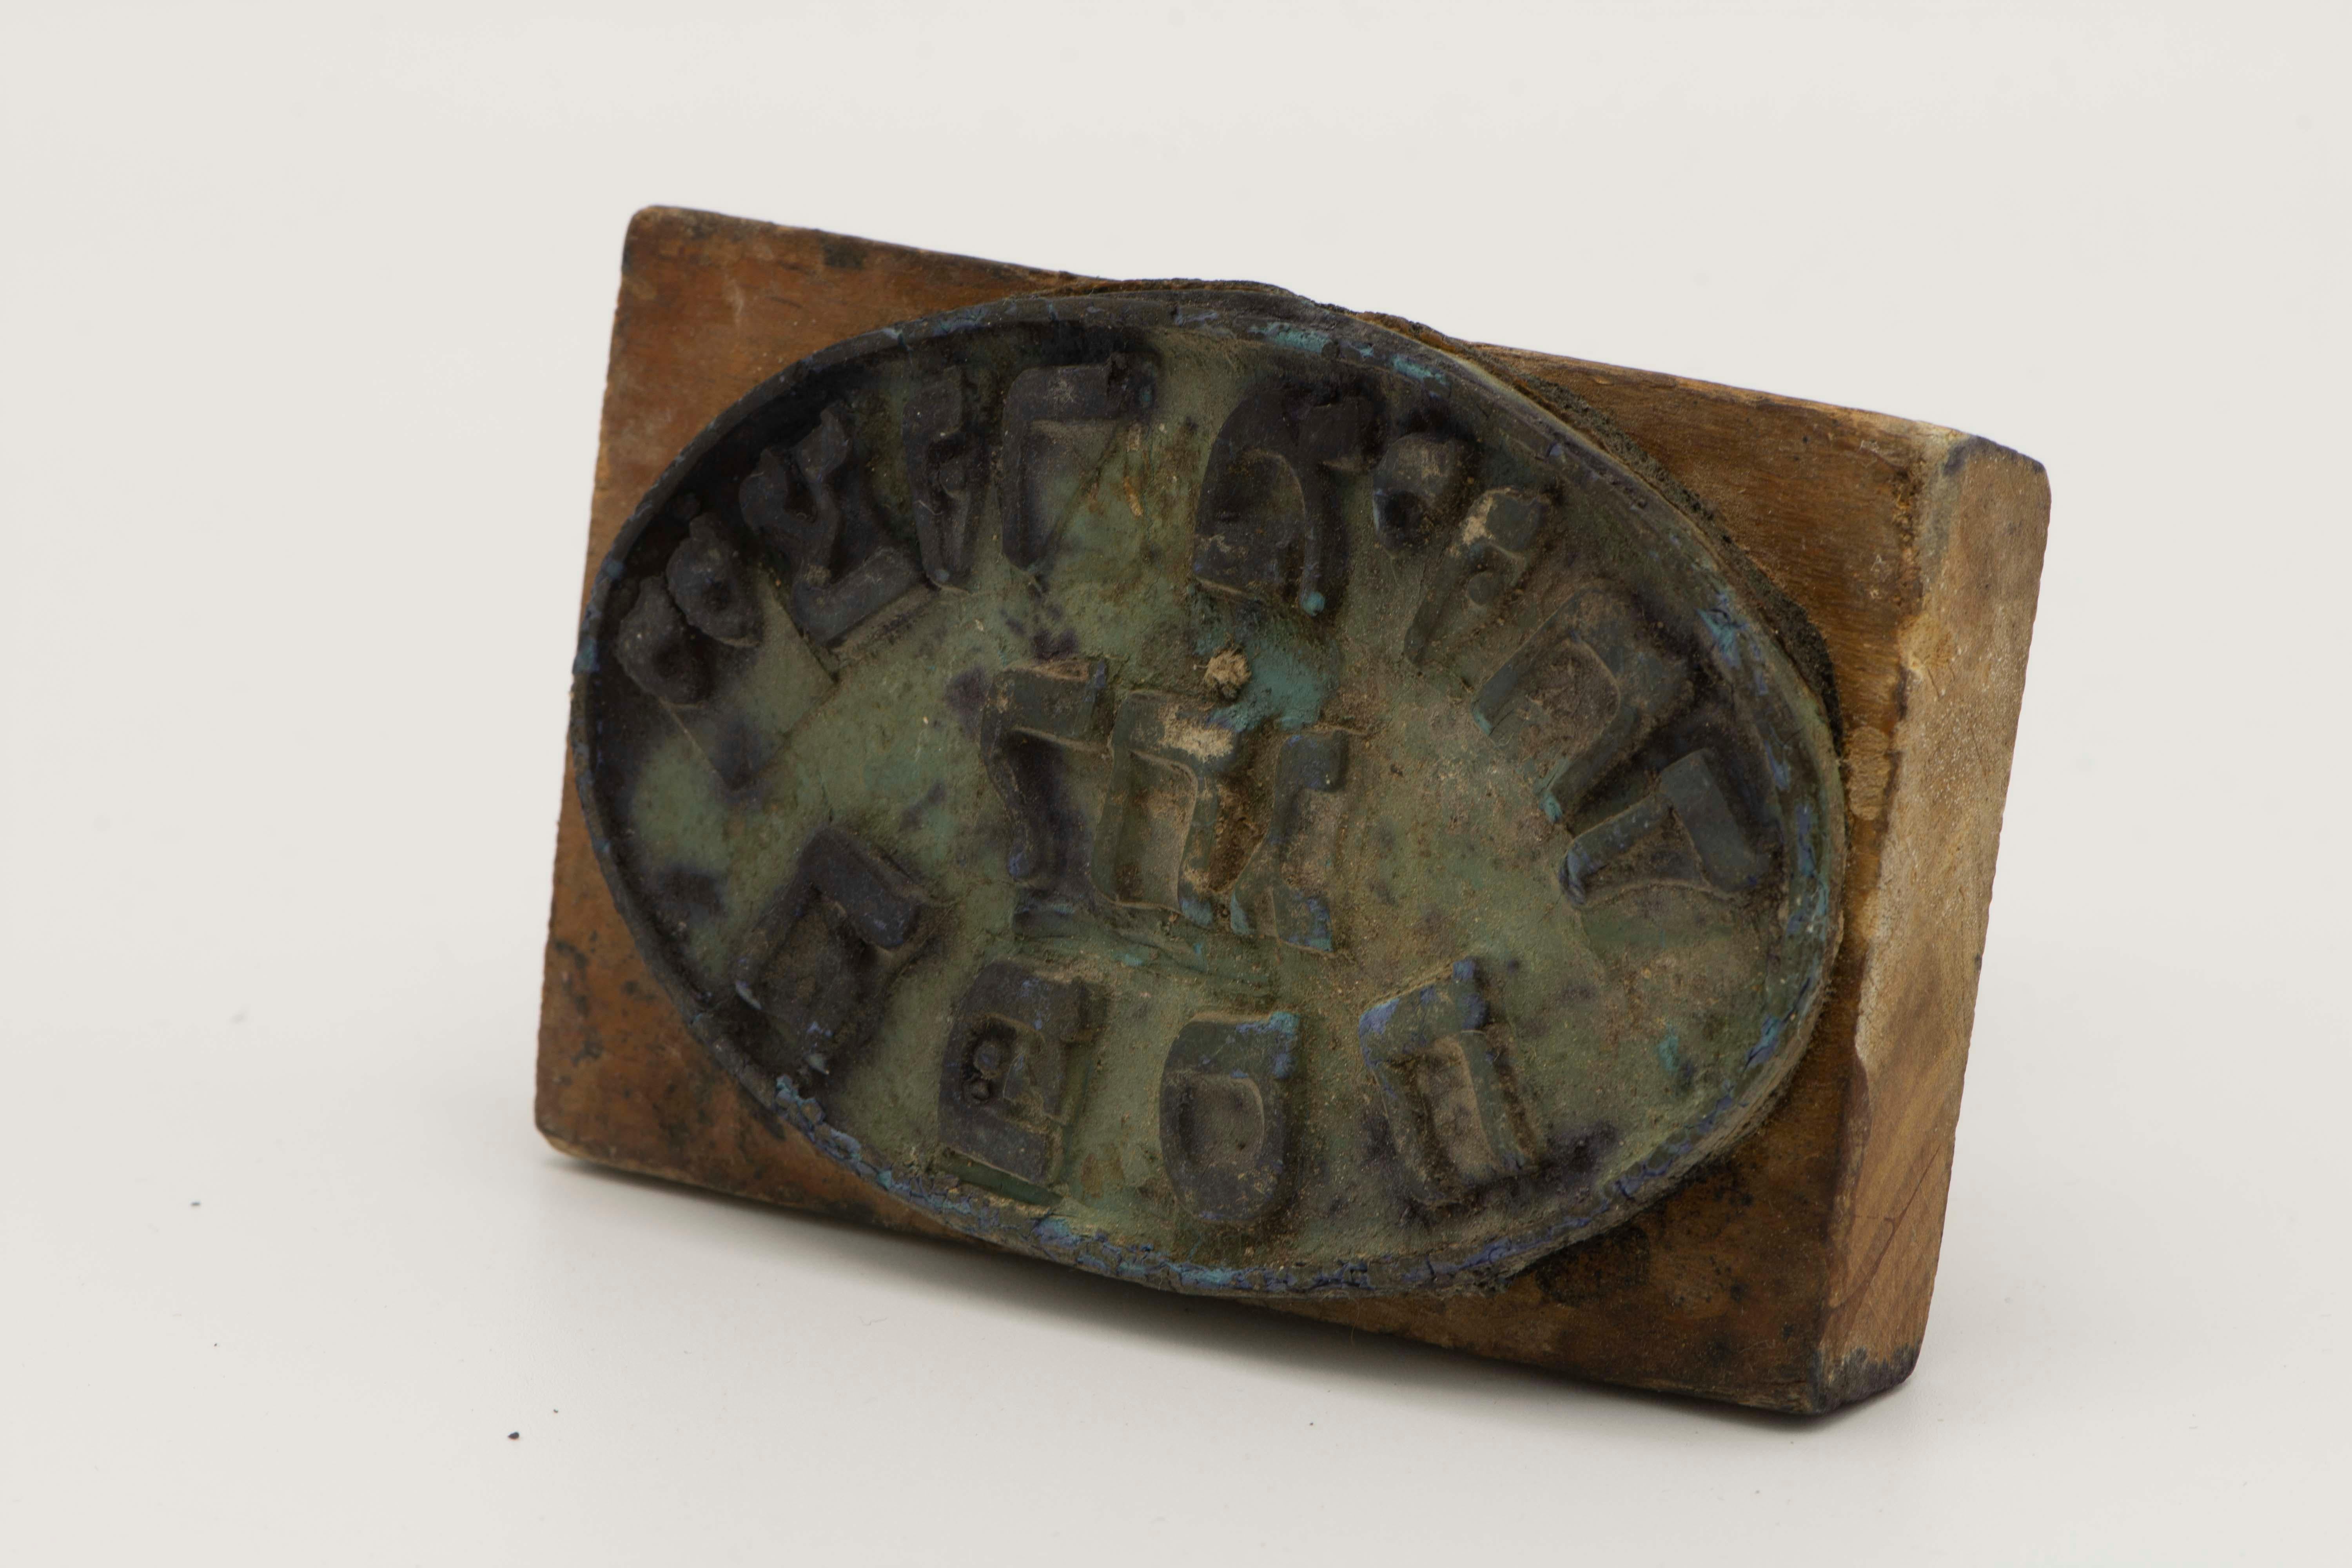 Vintage rubber stamp for Kosher Passover food, Israel, circa 1950.
The stamp was made specially to mark Kosher food for passover, and bearing Hebrew text: 